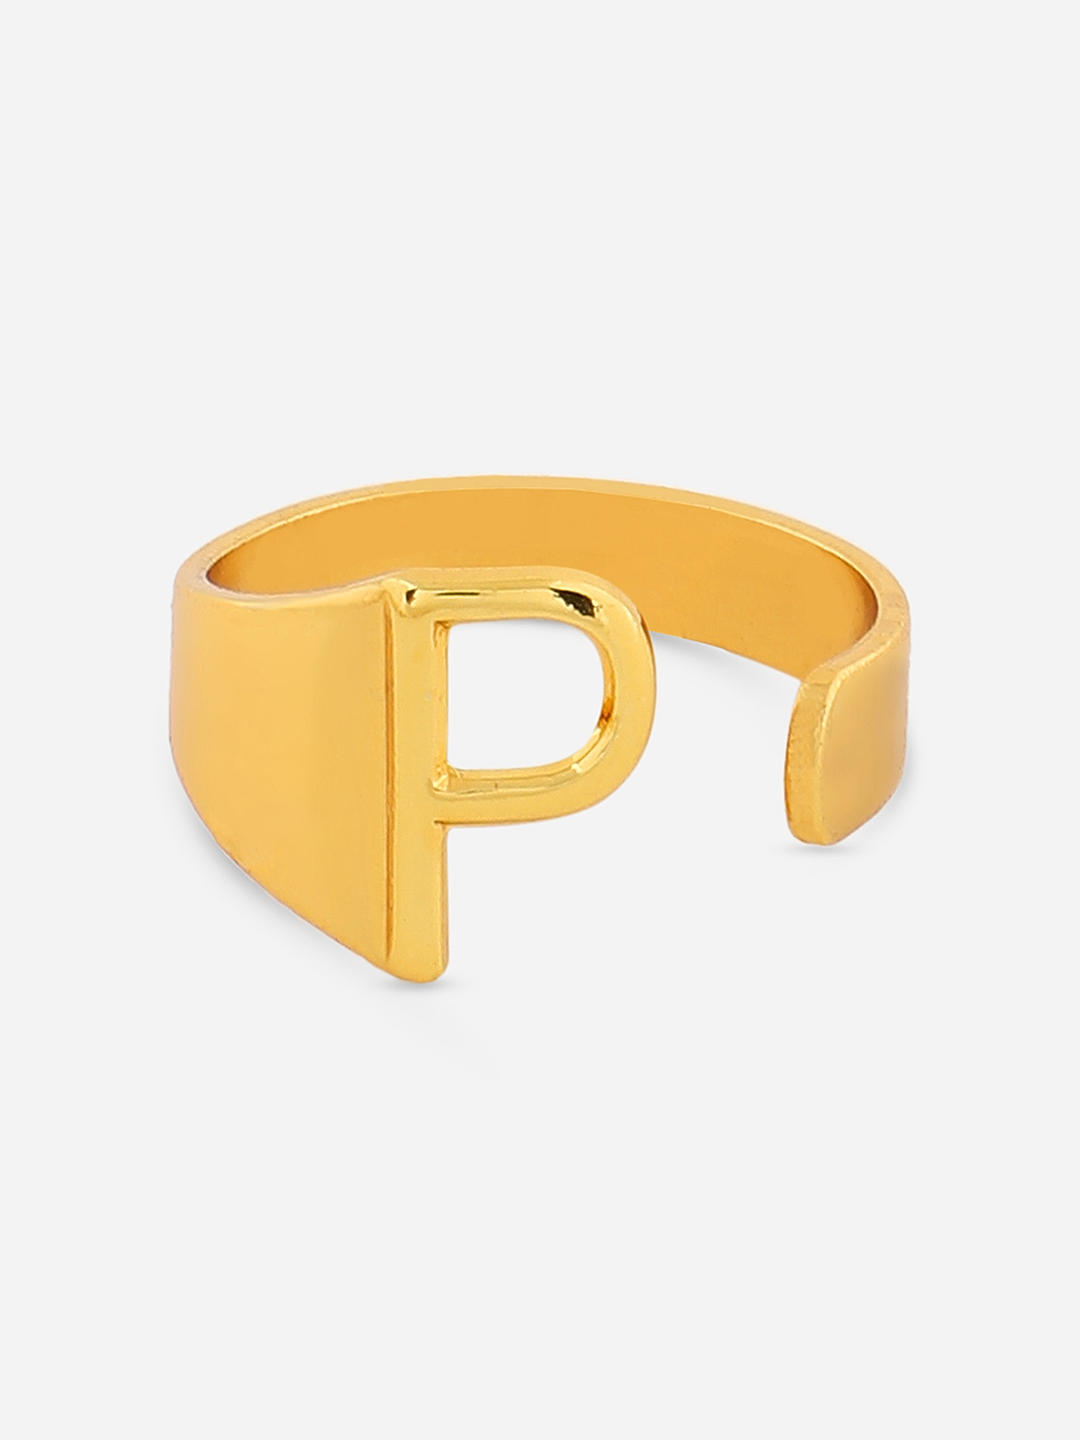 fcity.in - Latter Name Ring / Sizzling Fancy Rings